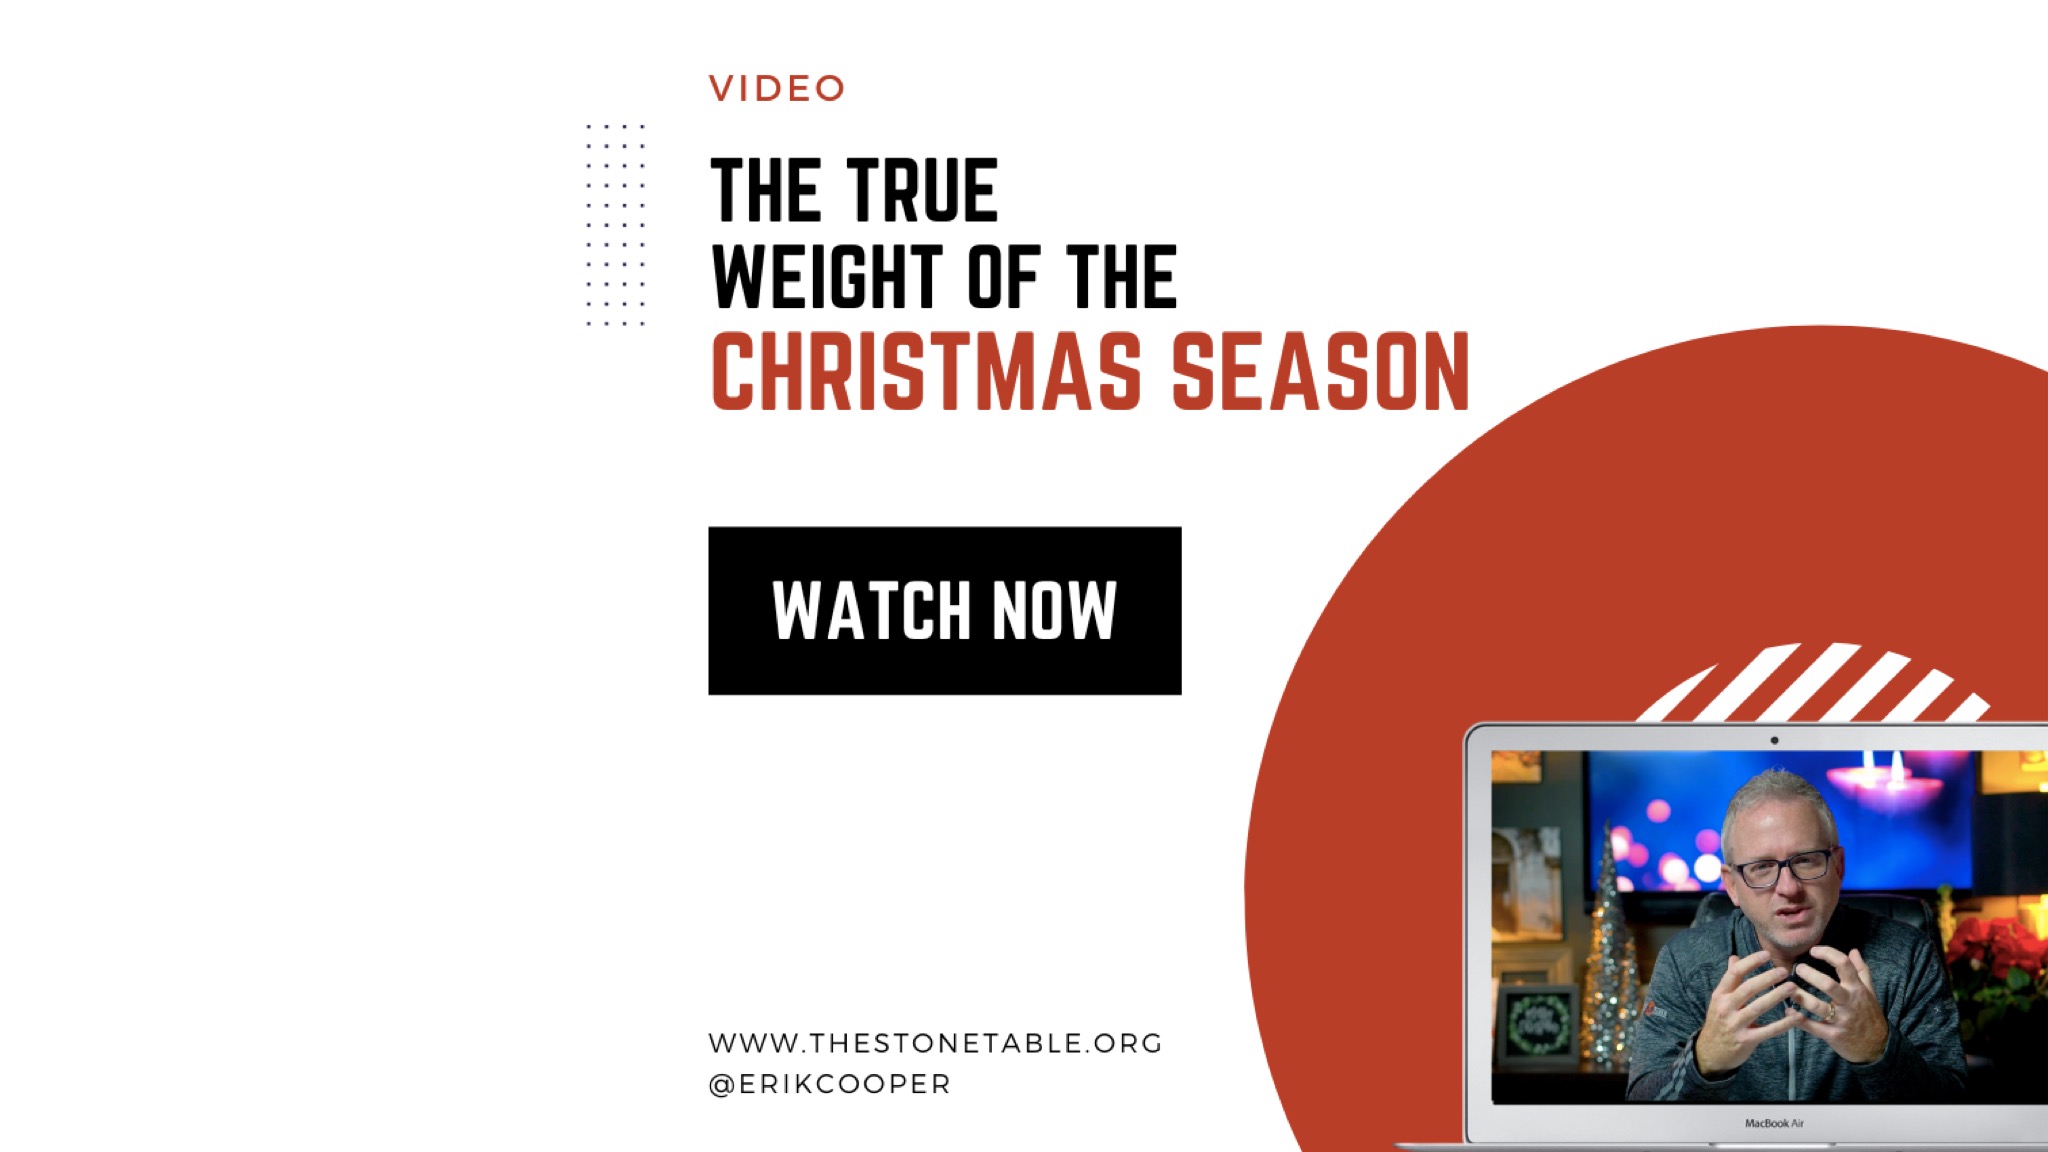 VIDEO: The True Weight of the Christmas Season